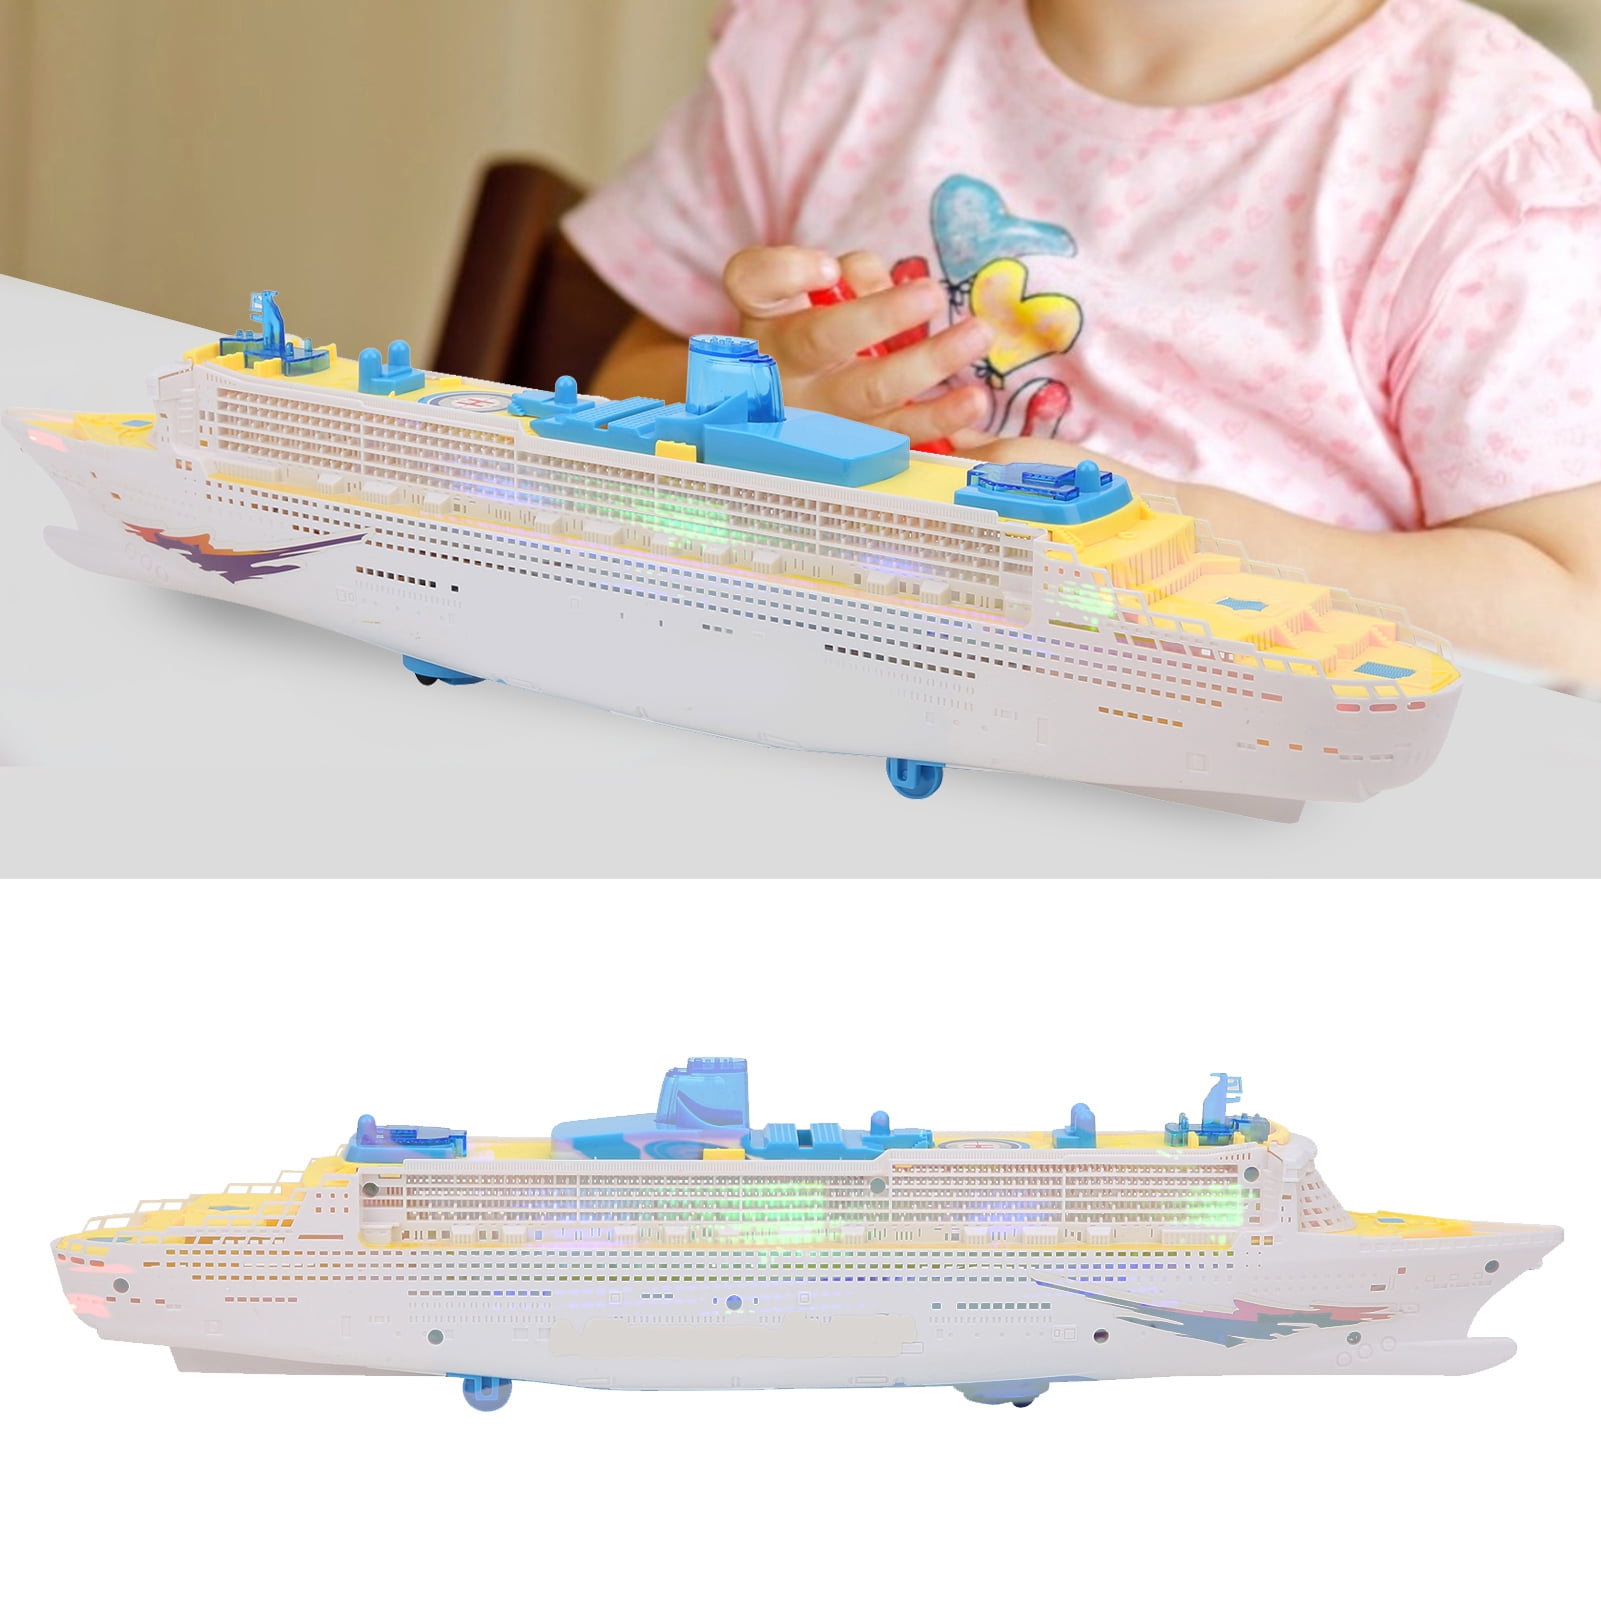 Octpeak Light Children Ship Boat Toy Highly Simulation Boat Toy With Lights Sound Effect Toys Funny Walmart.com